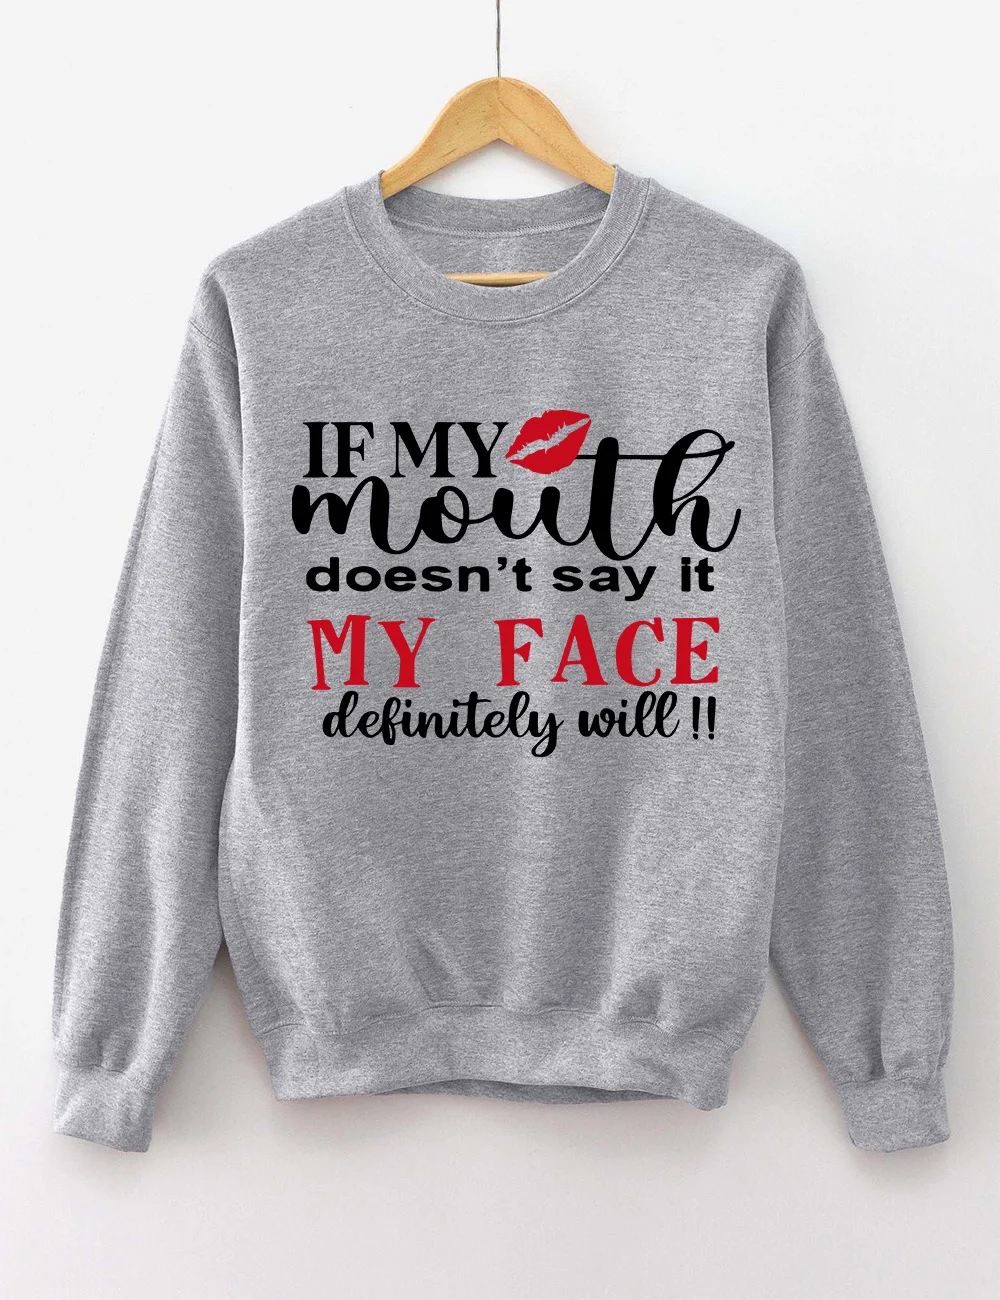 If My Mouth Doesn’t Say It My Face Definitely Will Sweatshirt